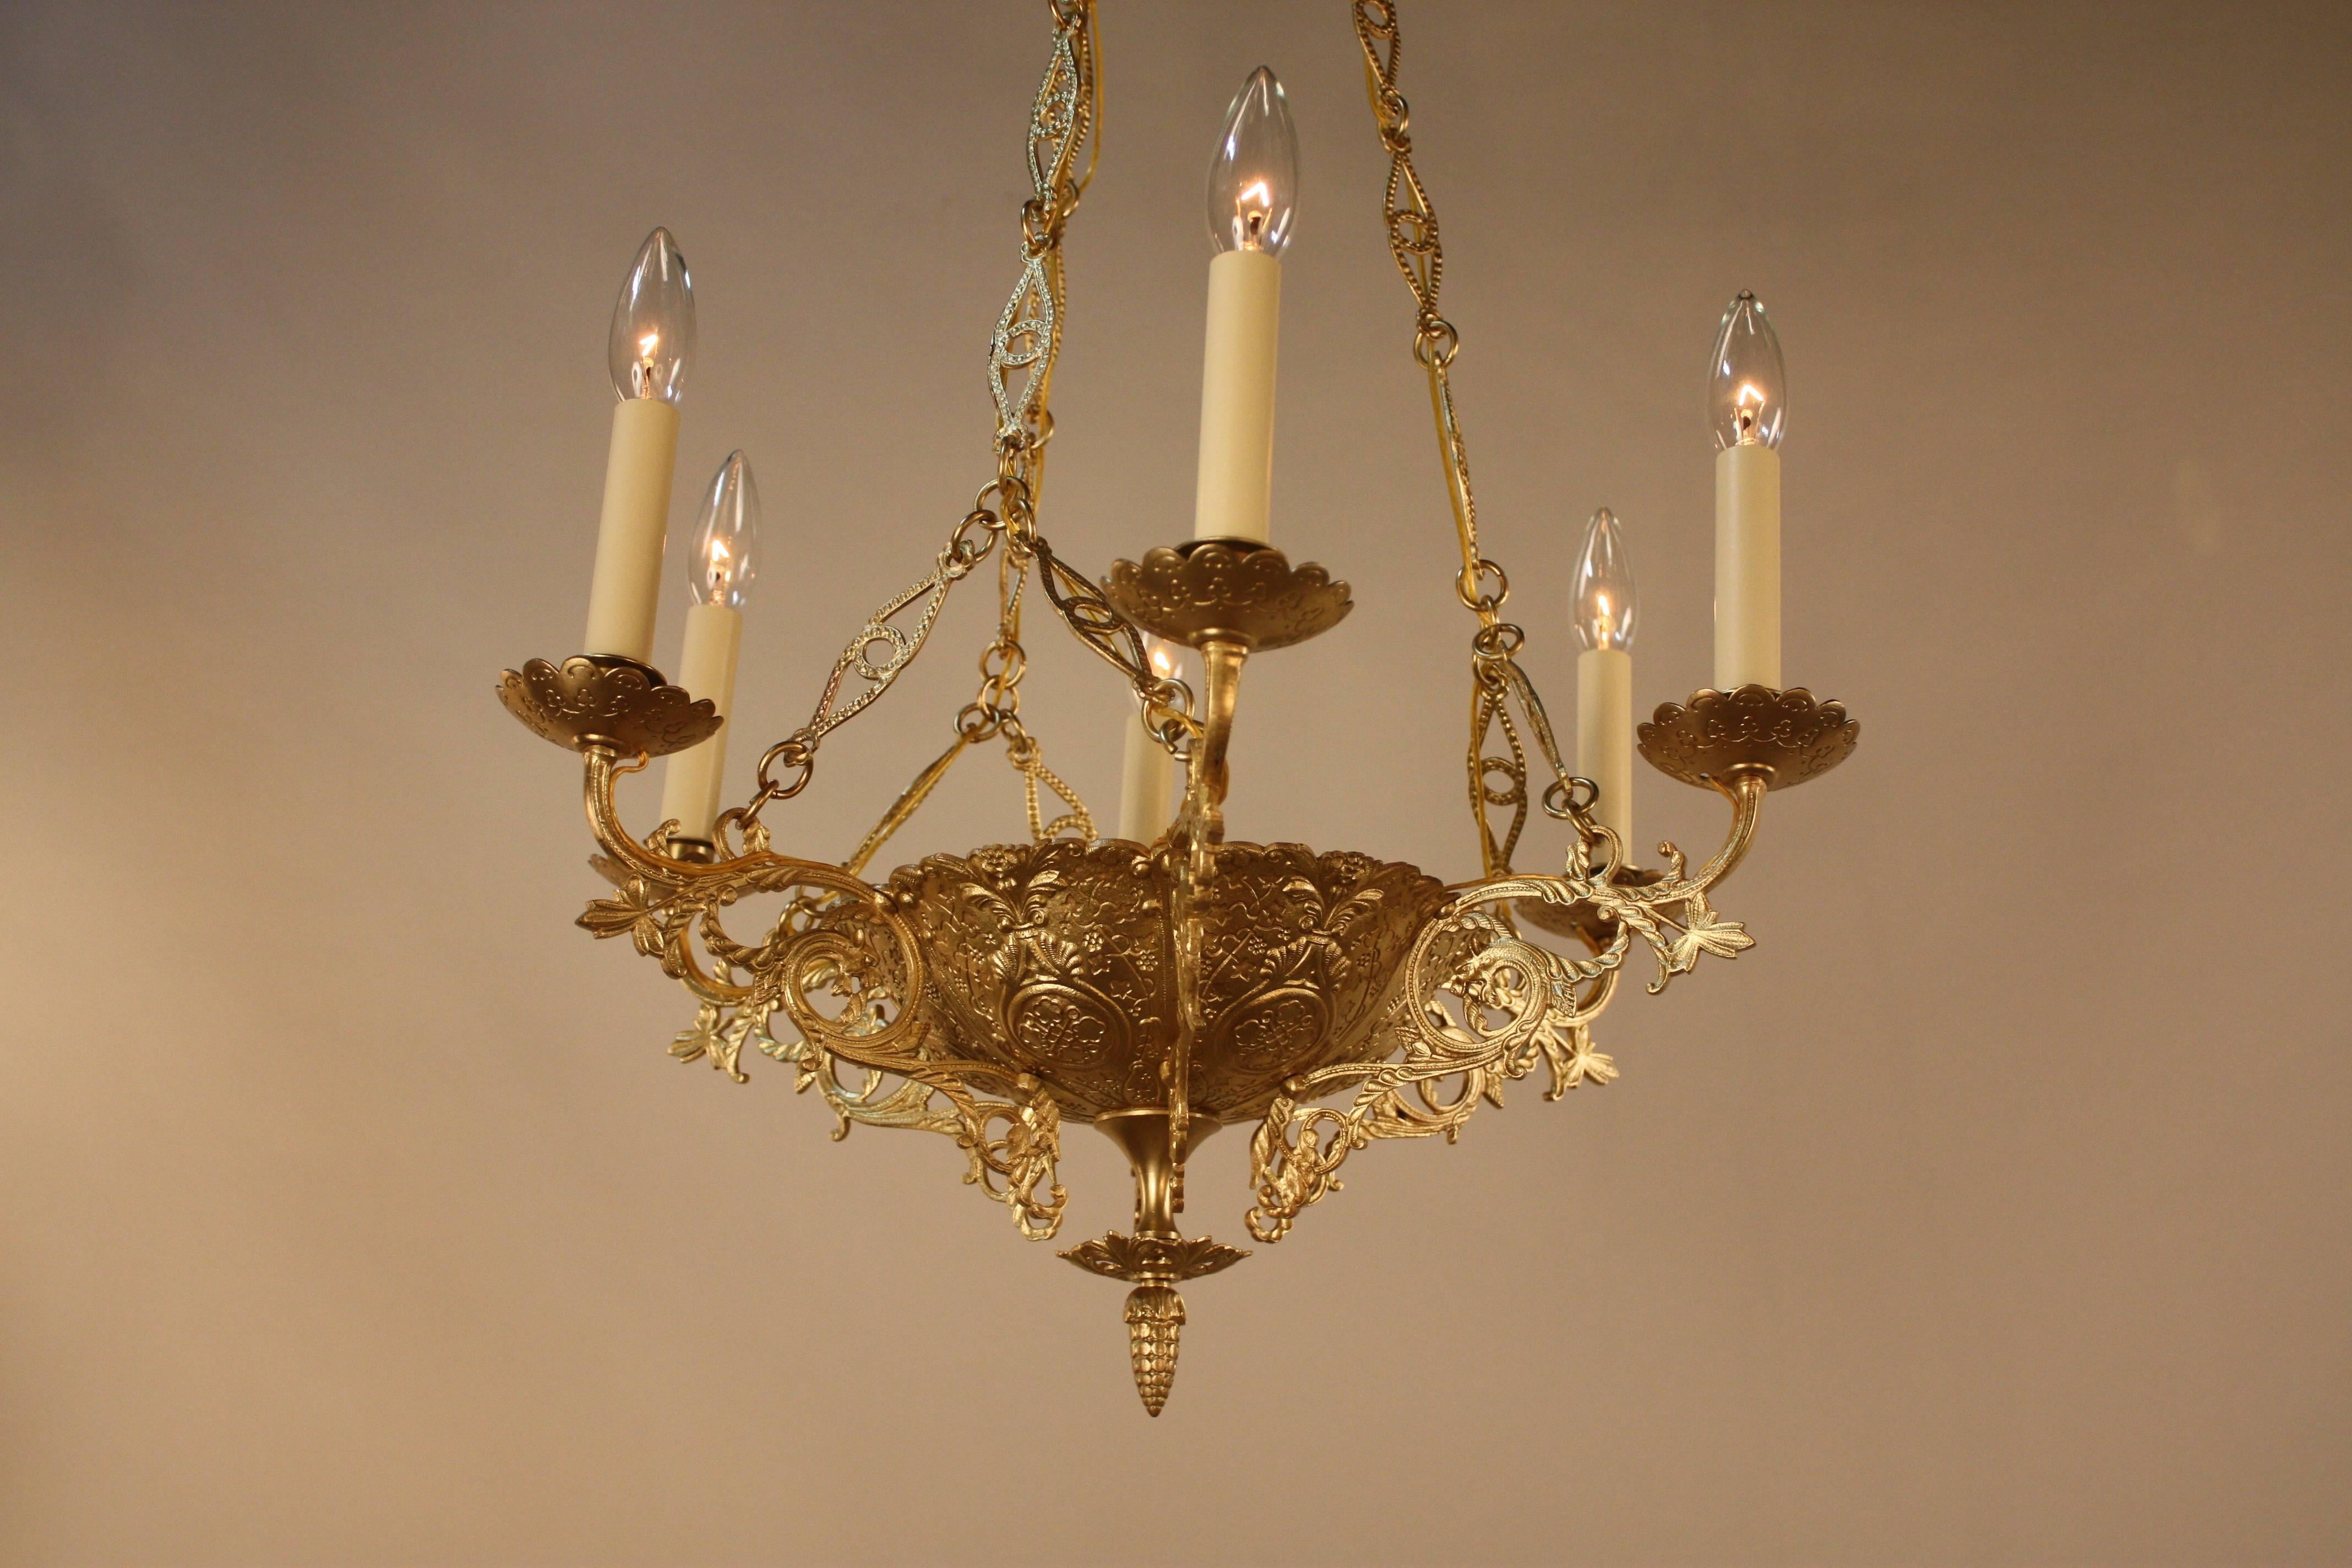 19th century six-light bronze chandelier. Originally burning candle that professionally has been electrified.